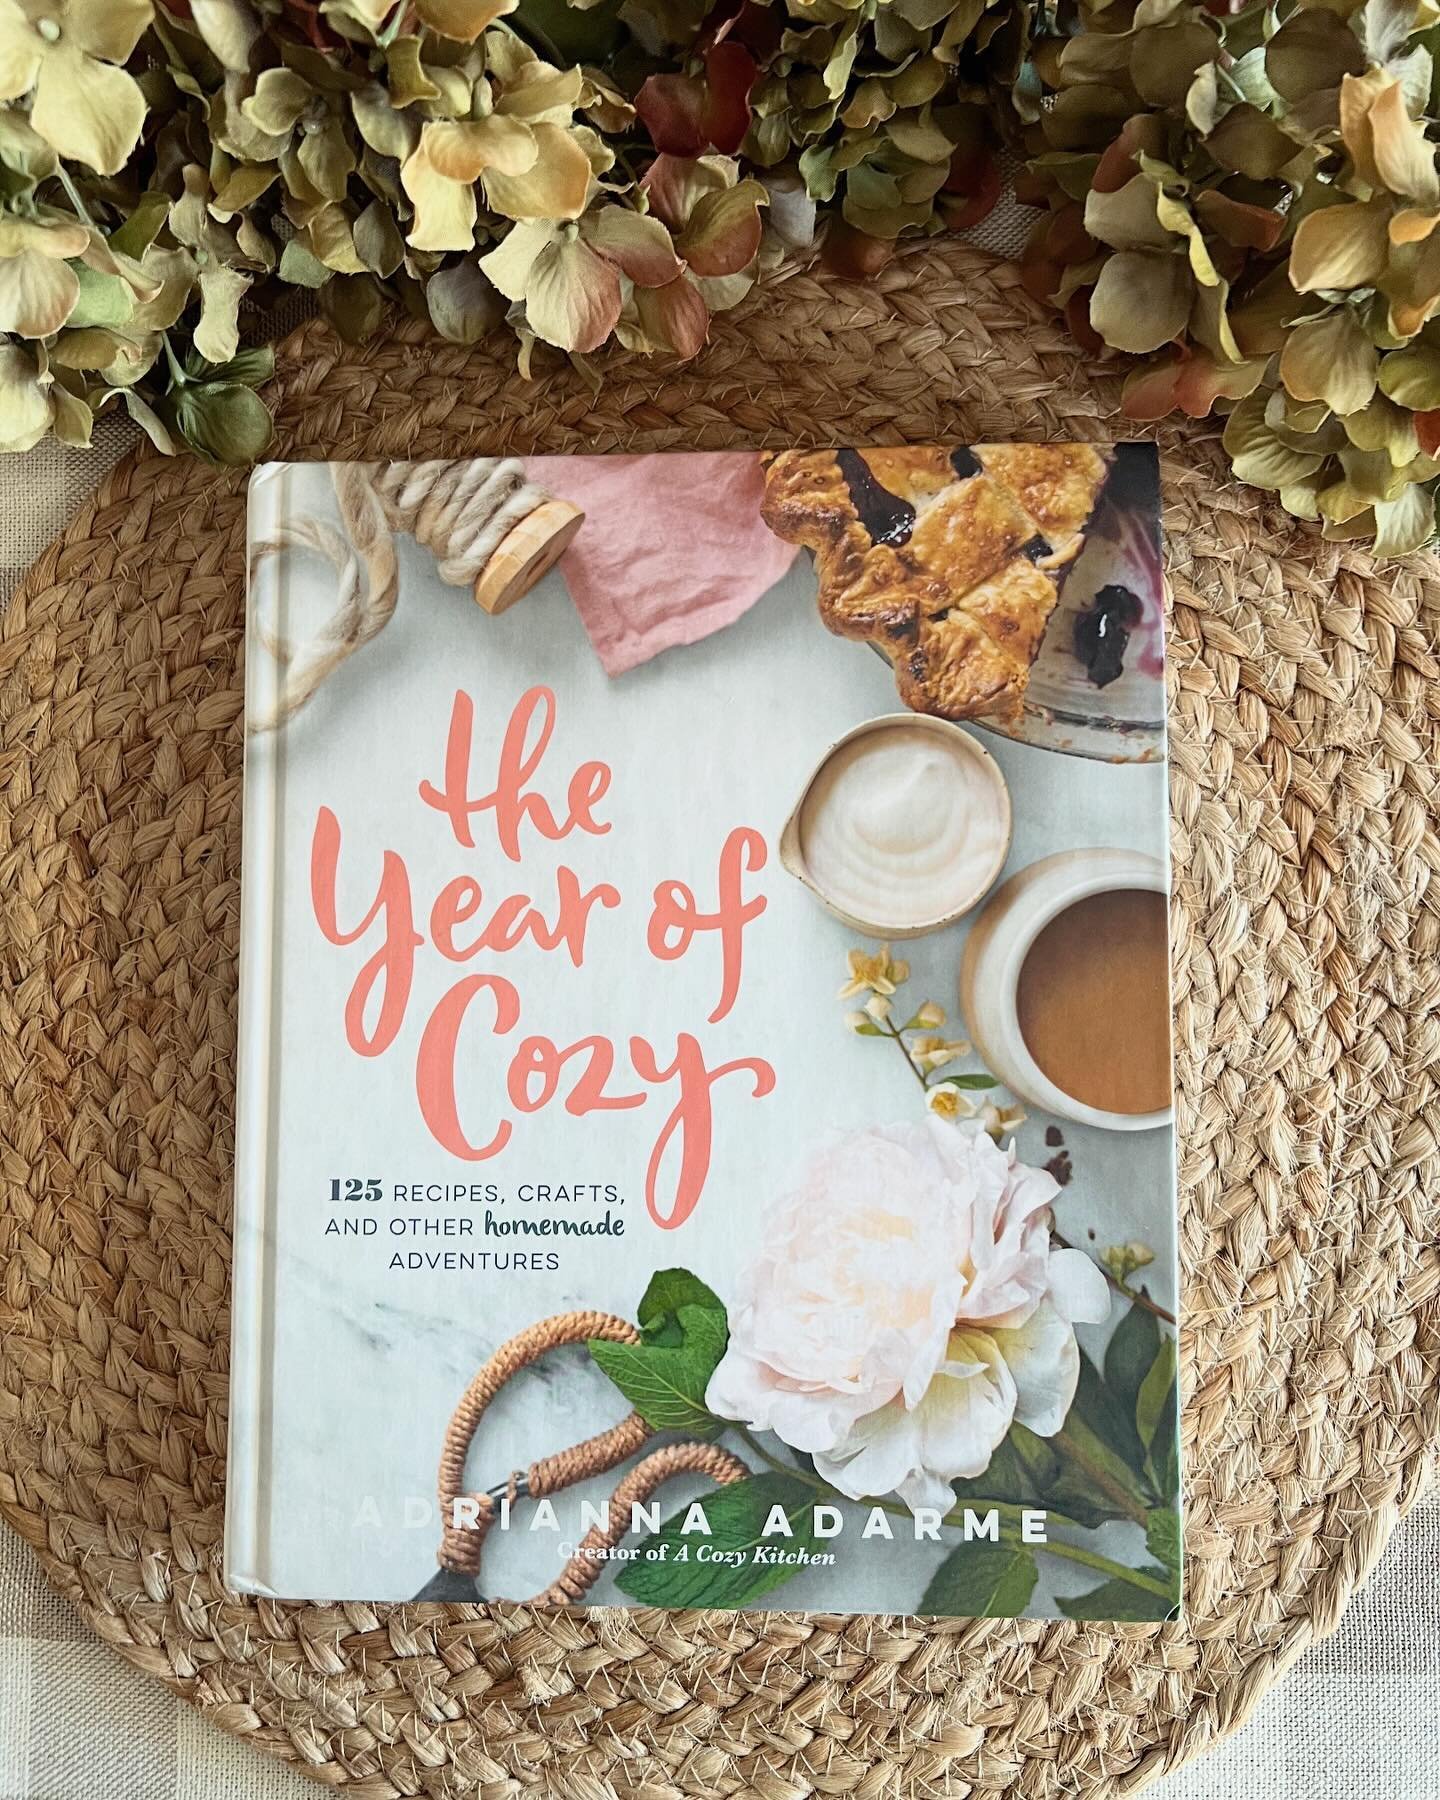 &ldquo;The Year of Cozy: 125 Recipes, Crafts, and Other Homemade Adventures&rdquo; by Adrianna Adarme, 2015

This gorgeous book is perfect for someone who is feeling the pull of making home more cozy and is looking for some inspiration. Not only does